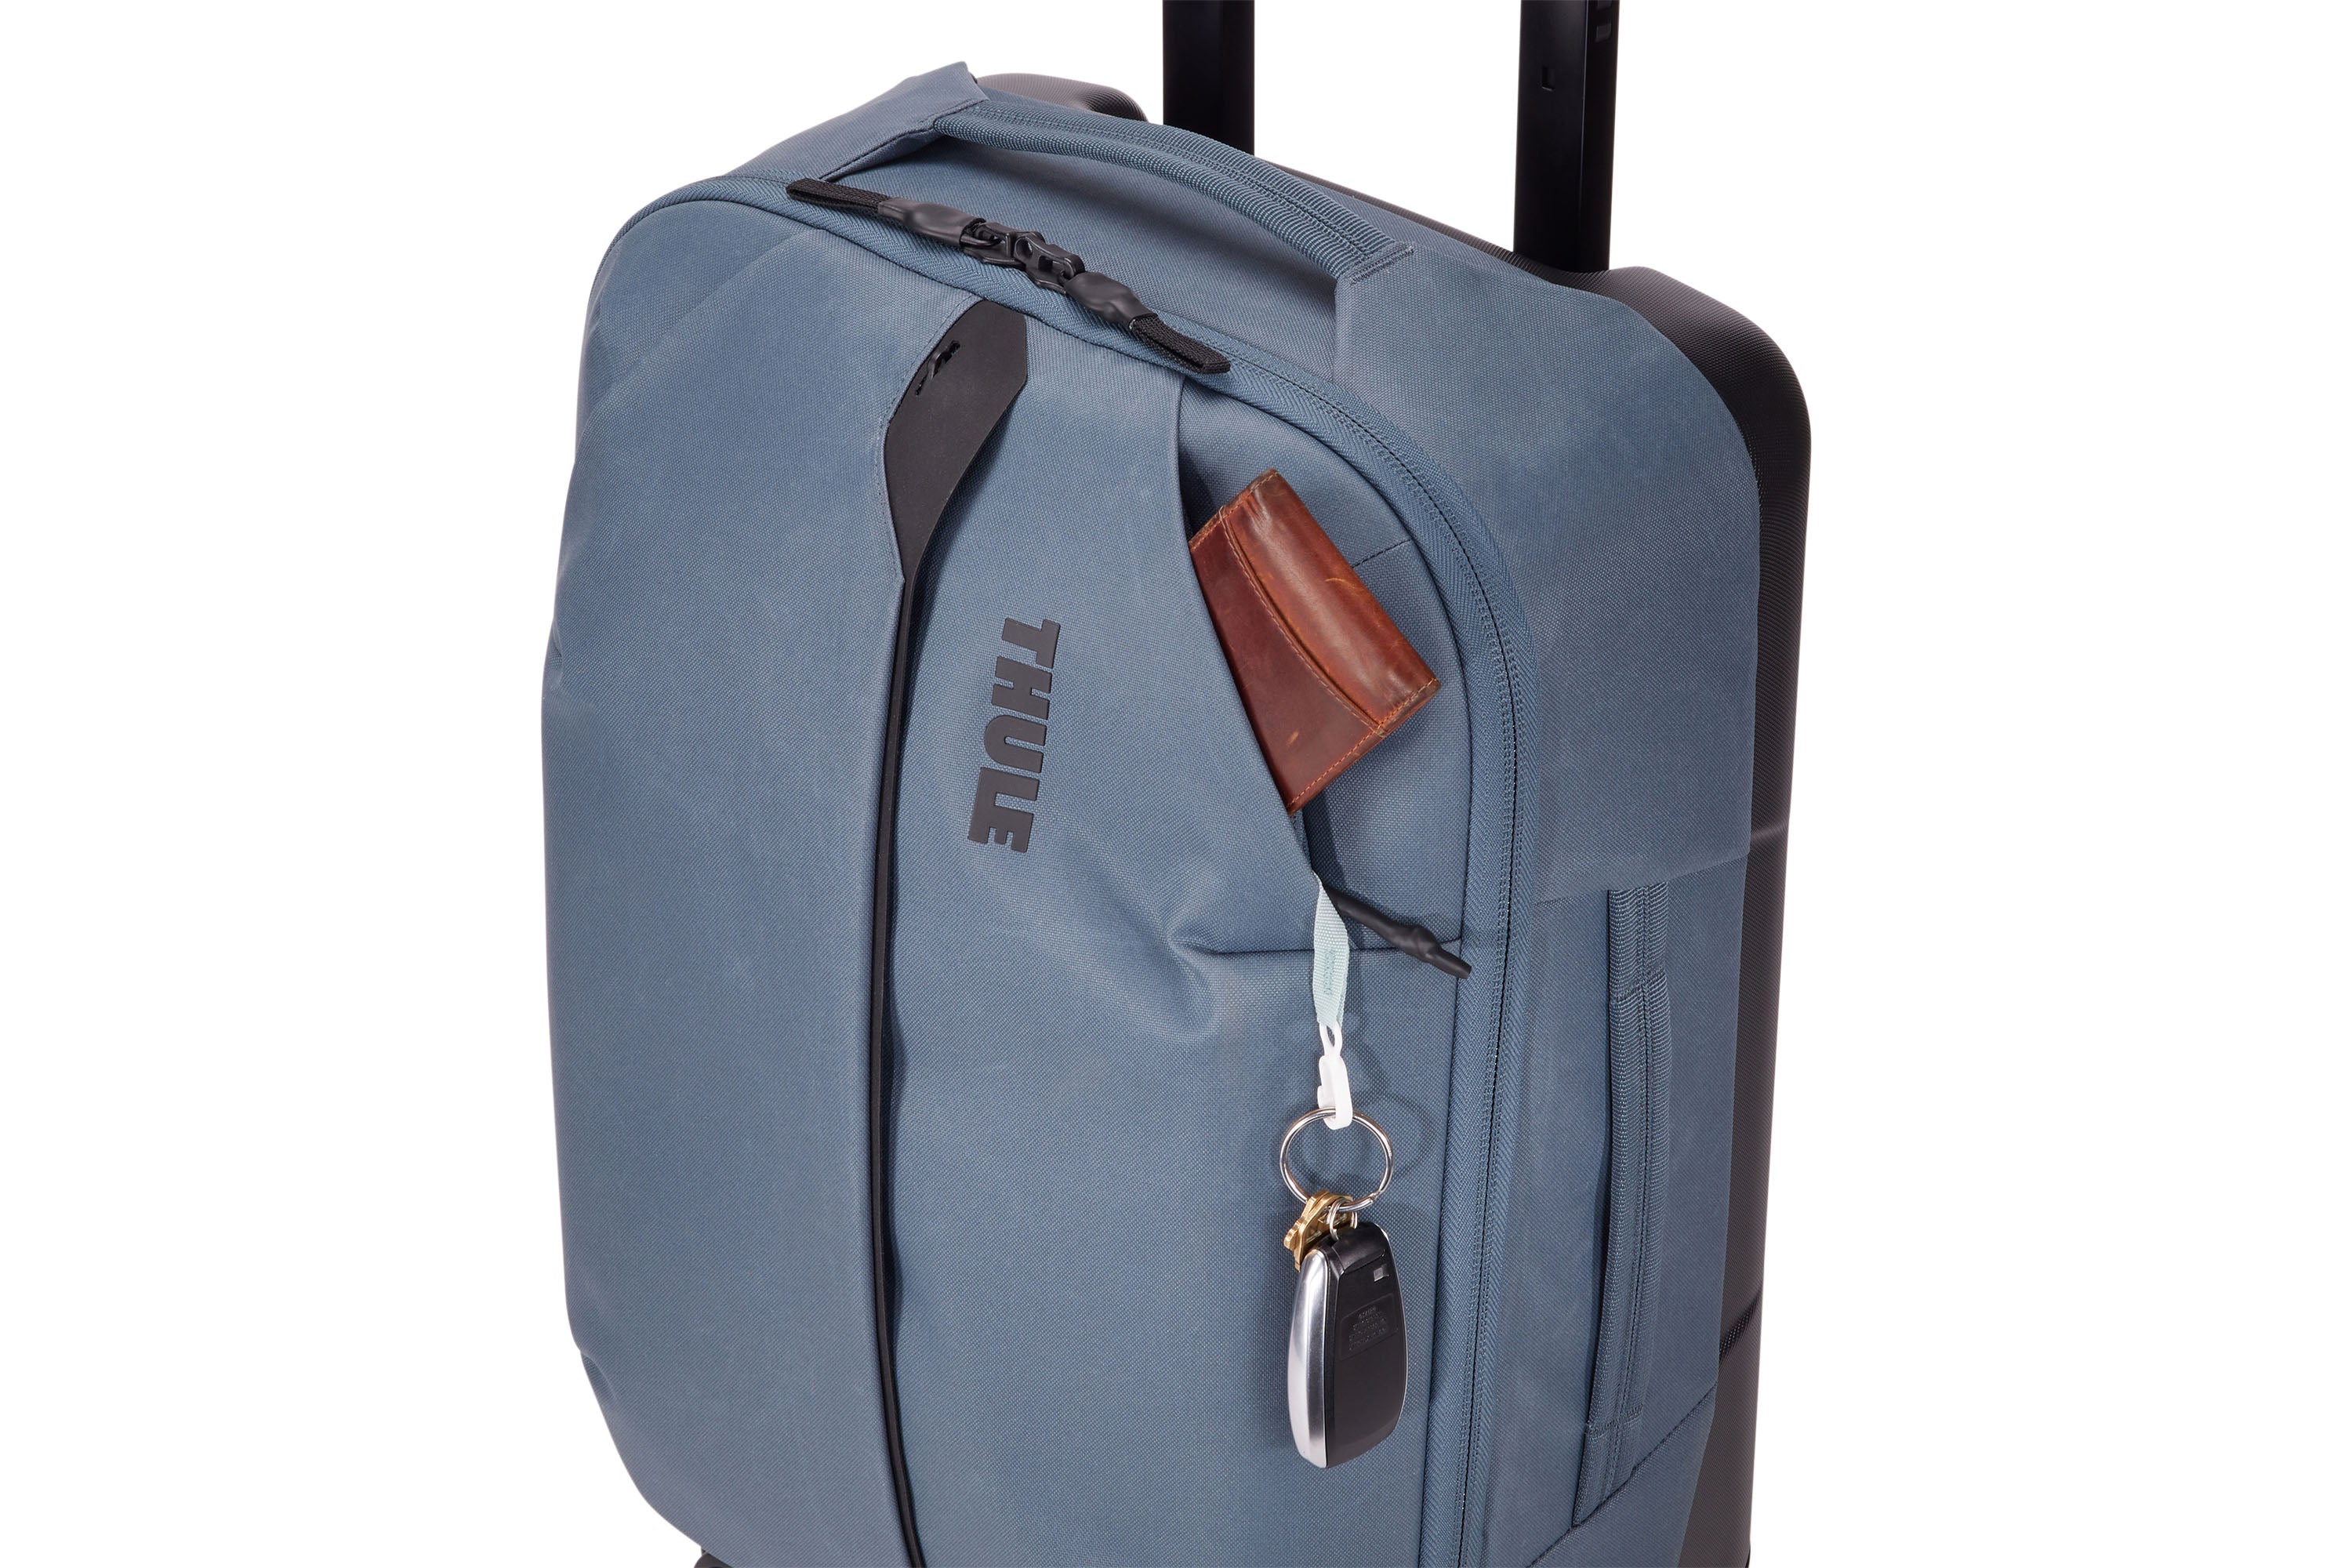 Thule Aion Carry-on Spinner